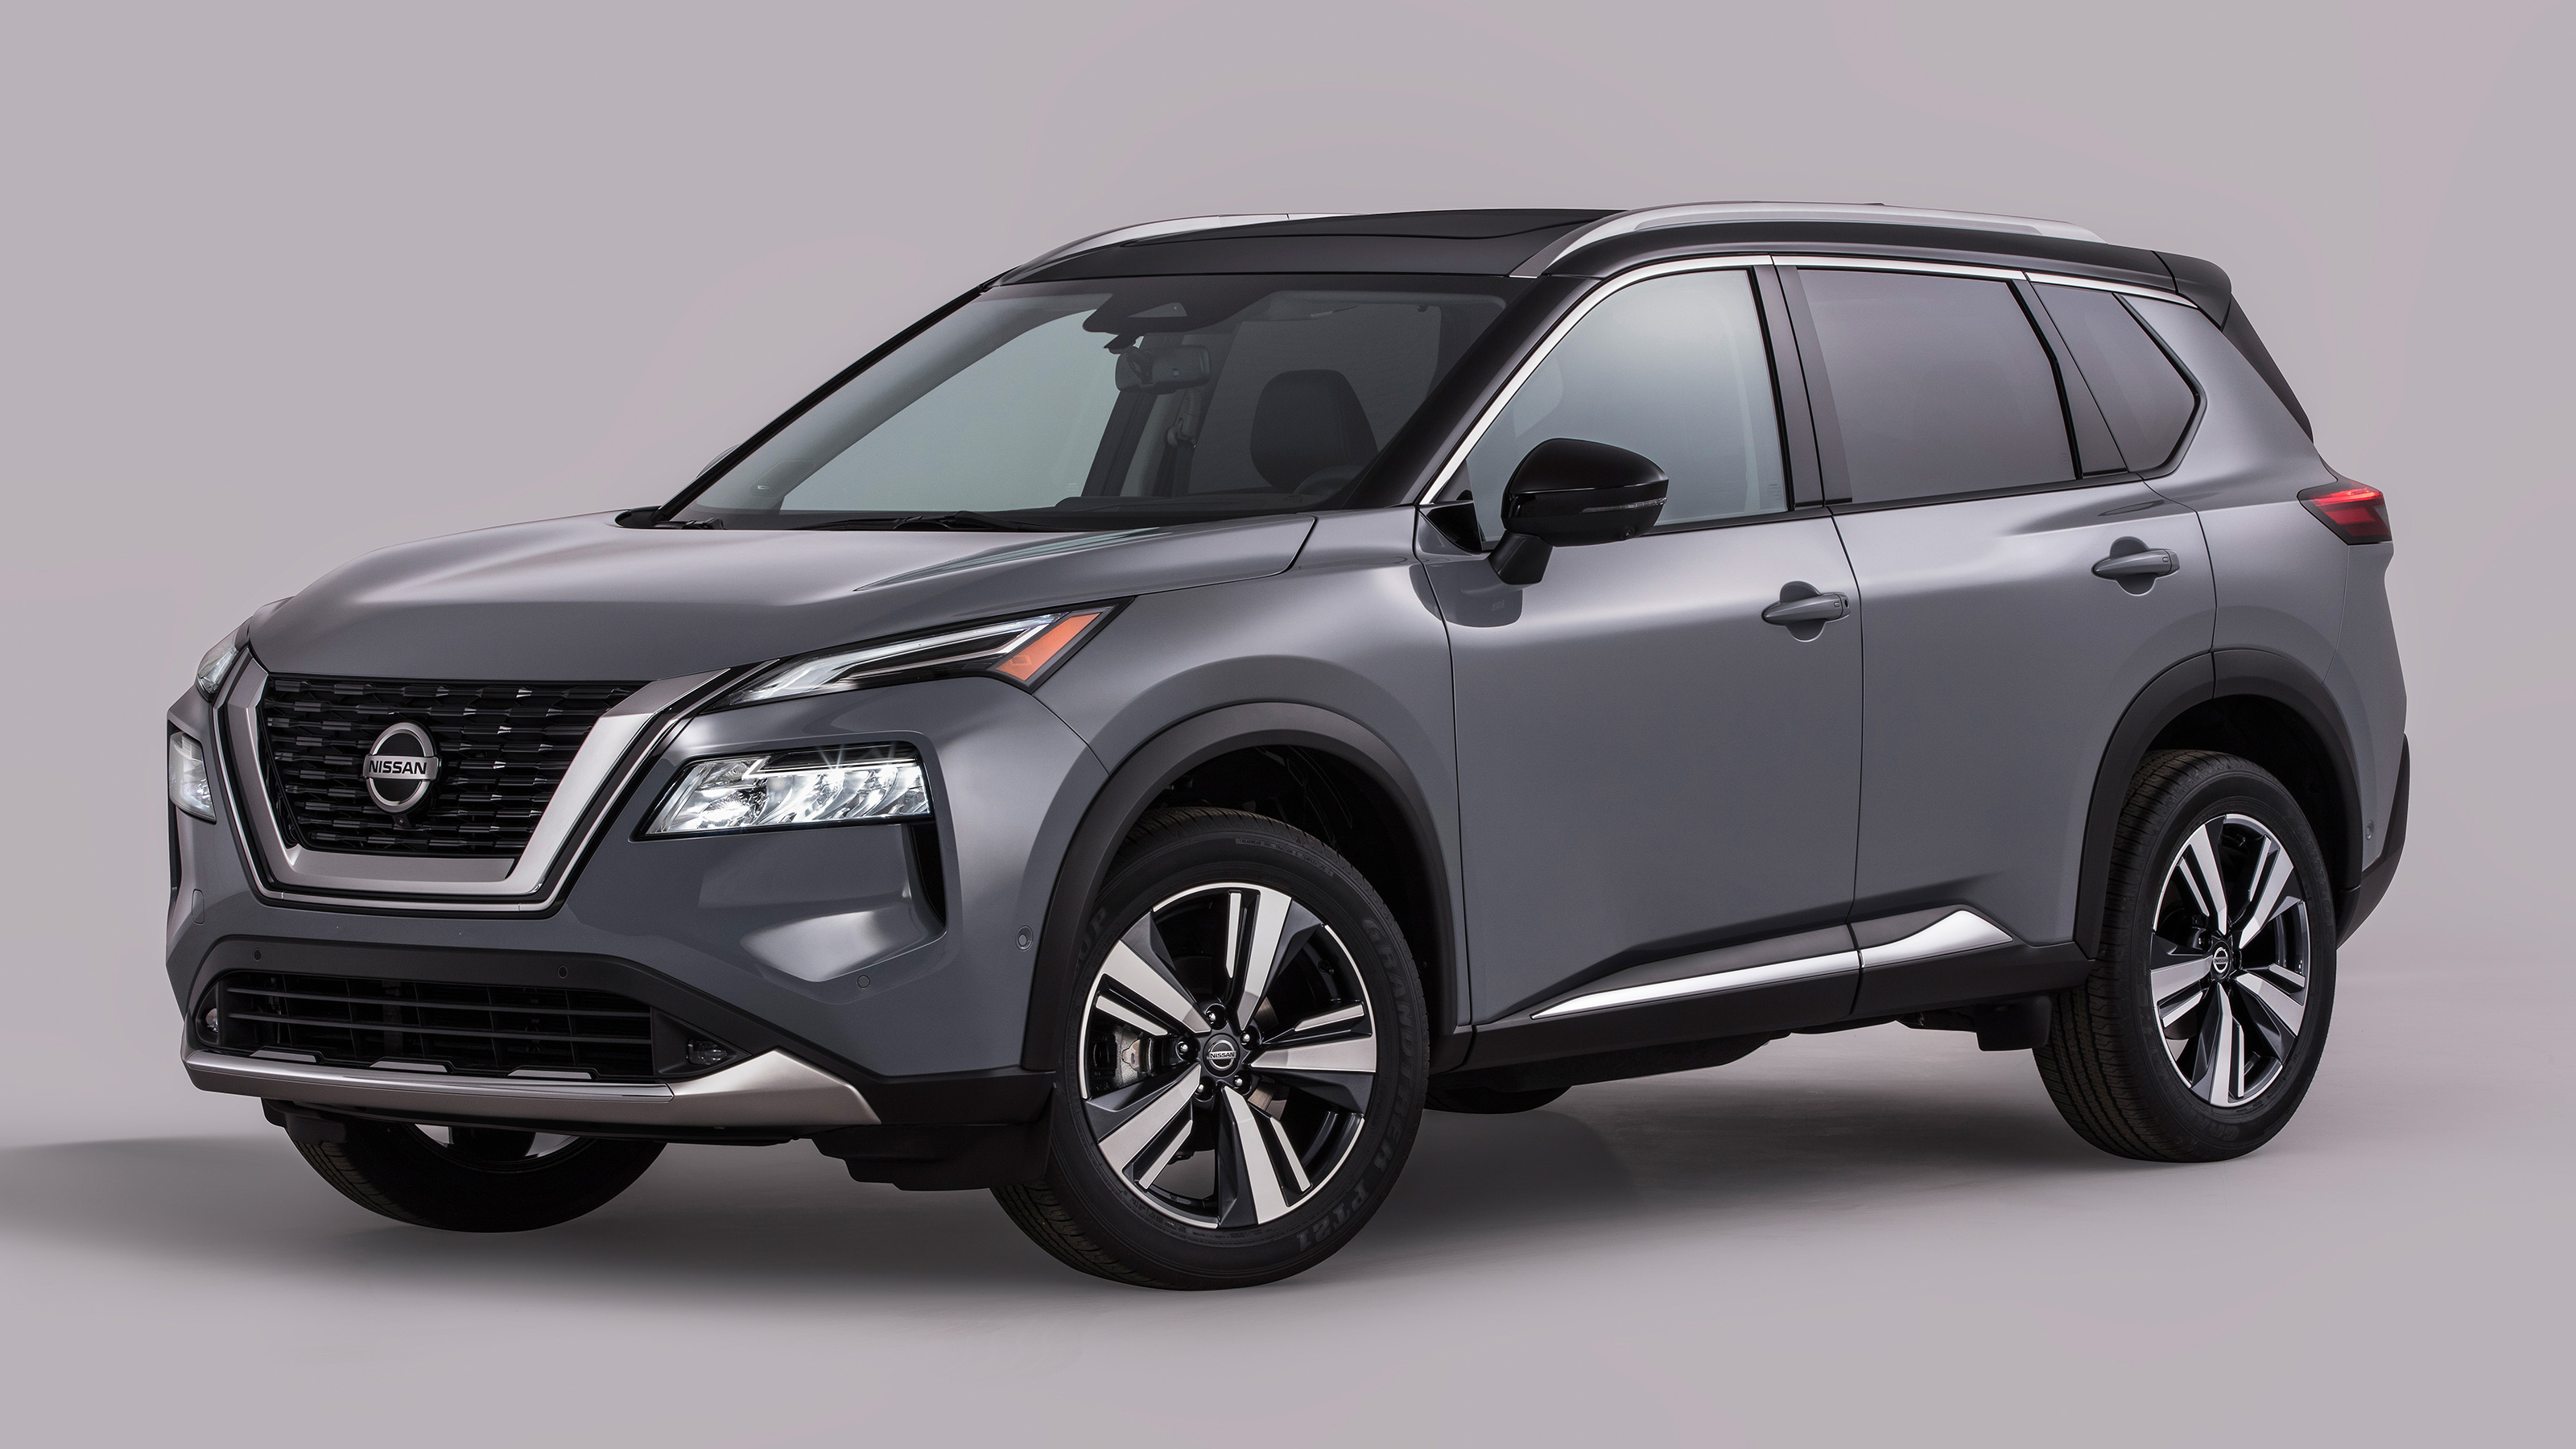 New 2021 Nissan X Trail Revealed In Us Only Nissan Rogue Form Auto Express